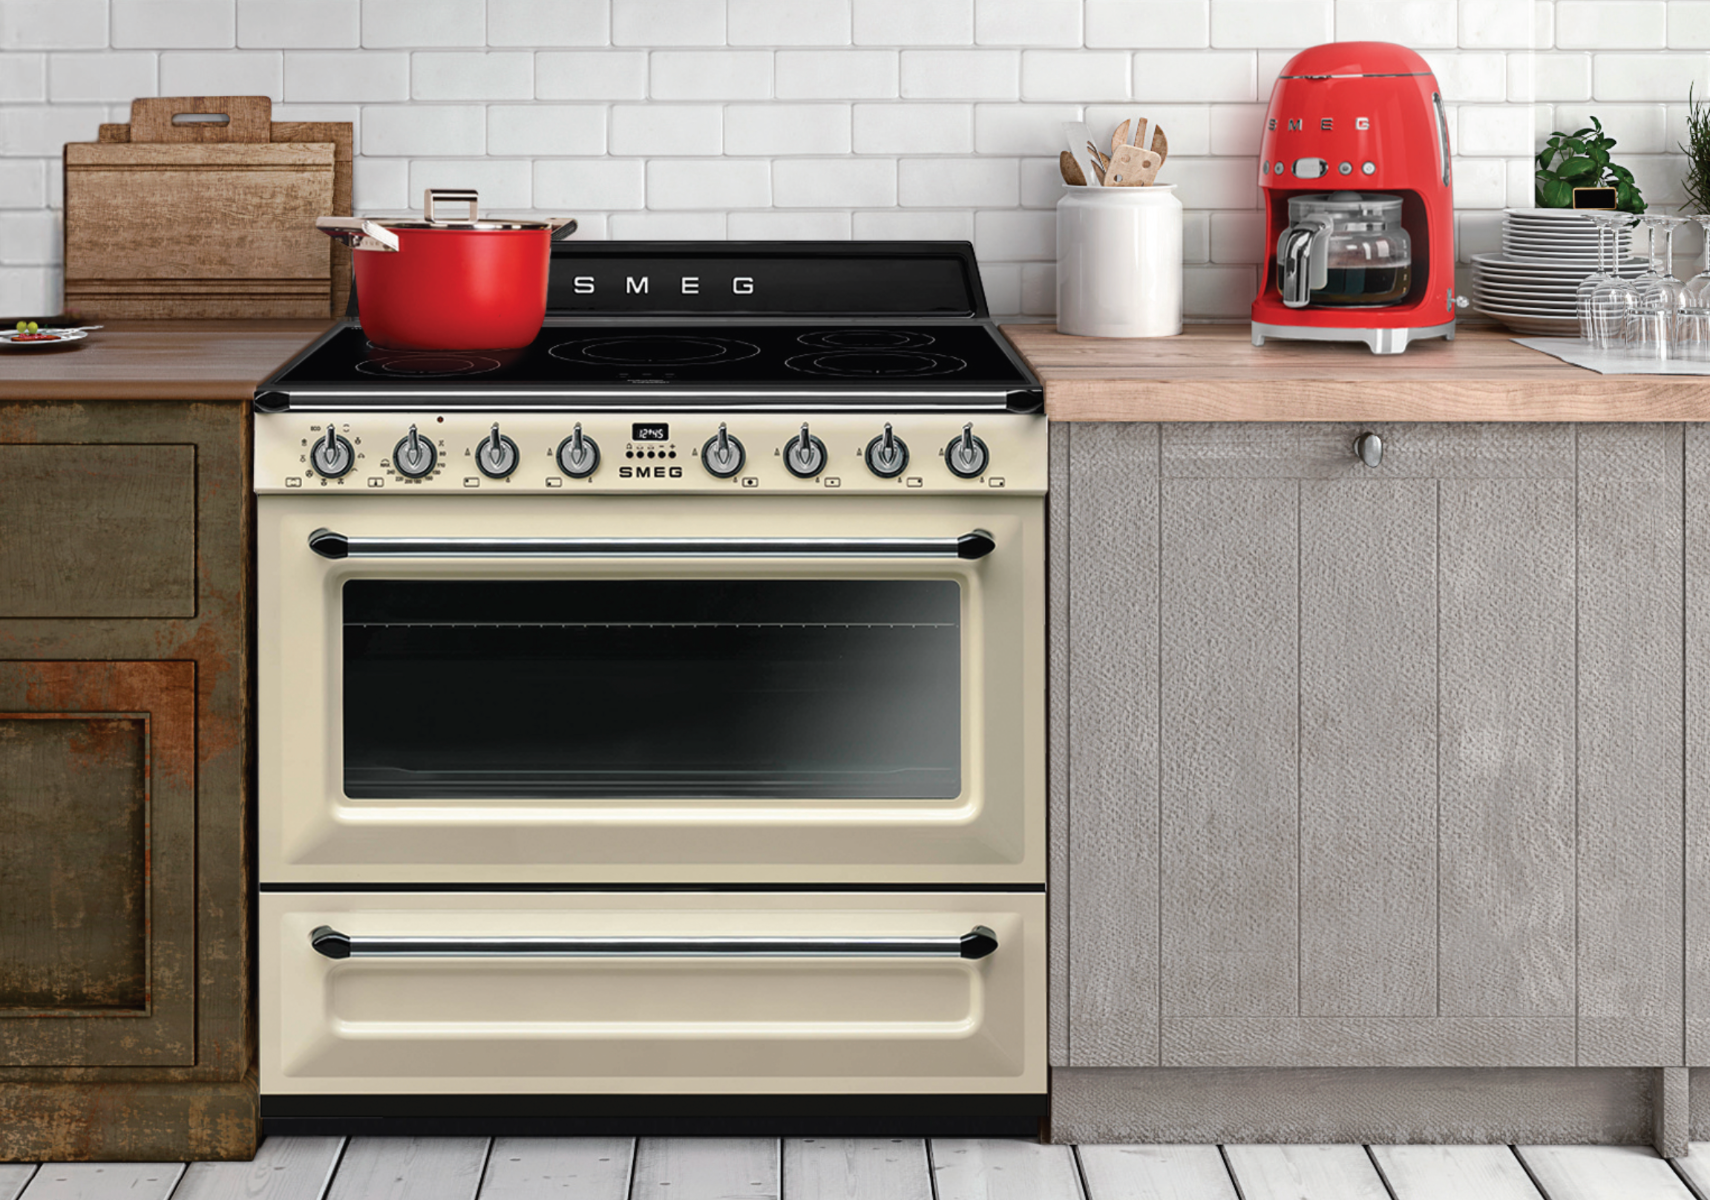 12 Must Have Kitchen Appliances for Your New Home